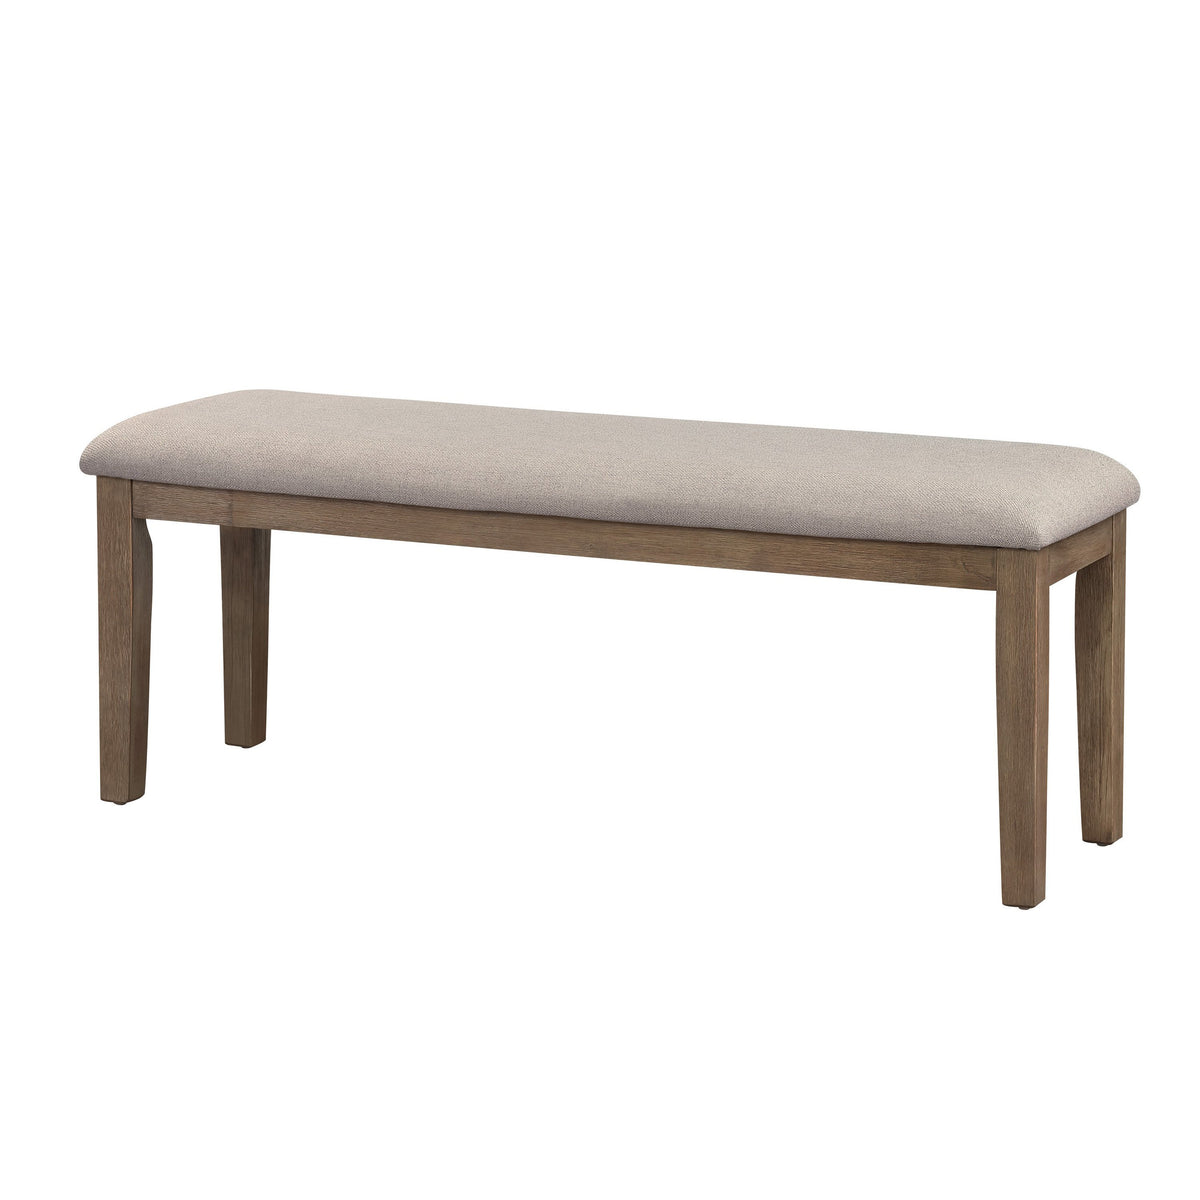 Rectangular Style Wooden Bench with Fabric Upholstered Seat,Brown and Beige - BM220934